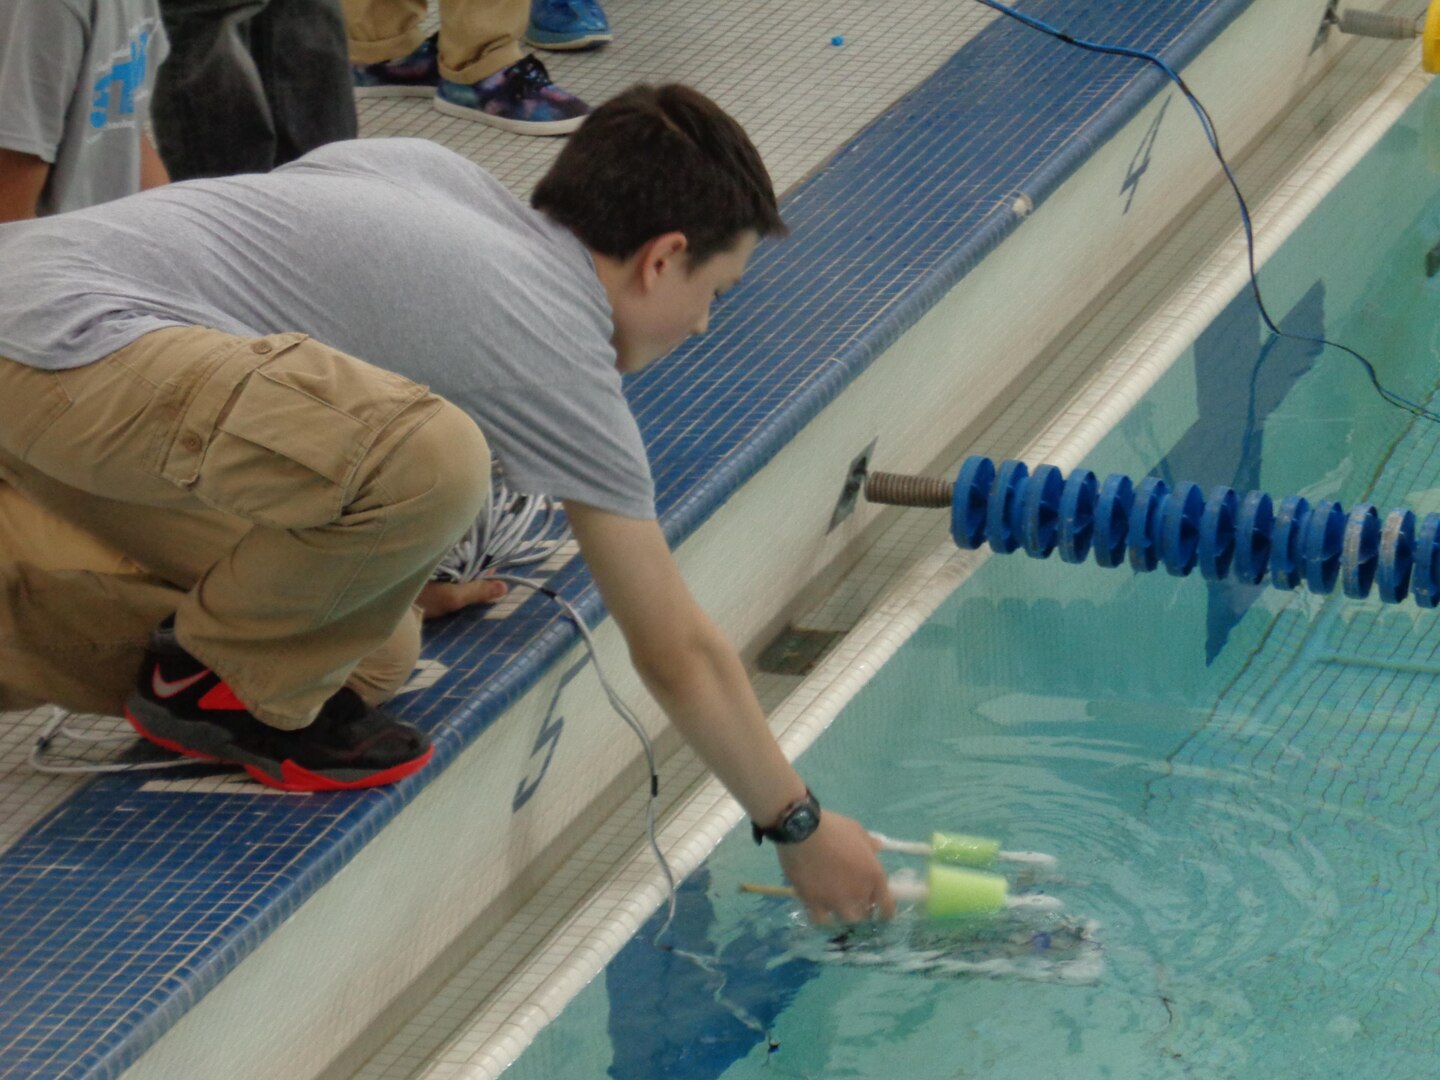 A SeaPerch contestant launches his remotely operated vehicle to complete in the underwater obstacle course during regional competition in Philadelphia.